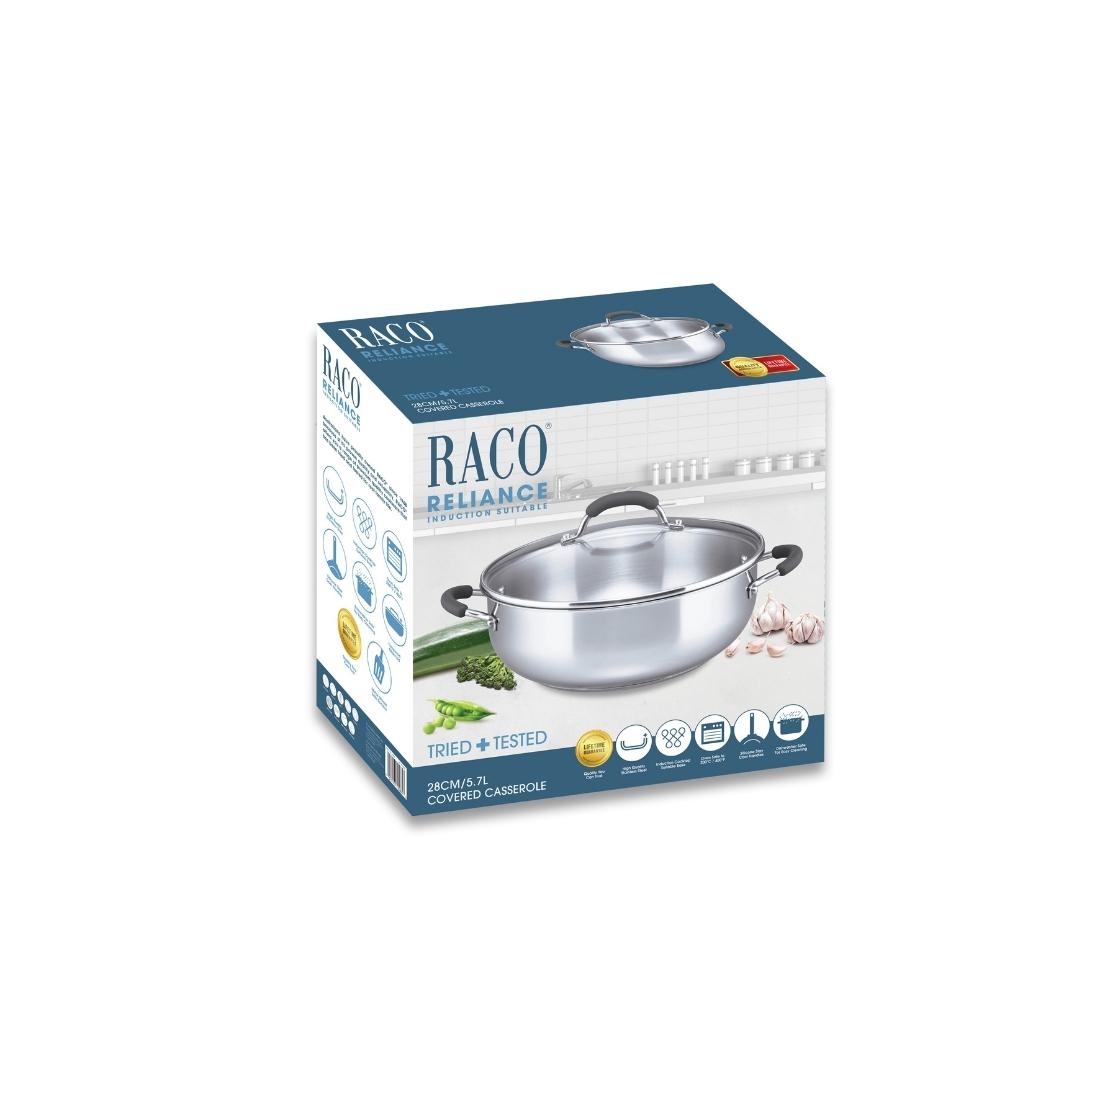 RACO Reliance Stainless Steel Induction Chef's Casserole 28cm/5.7L